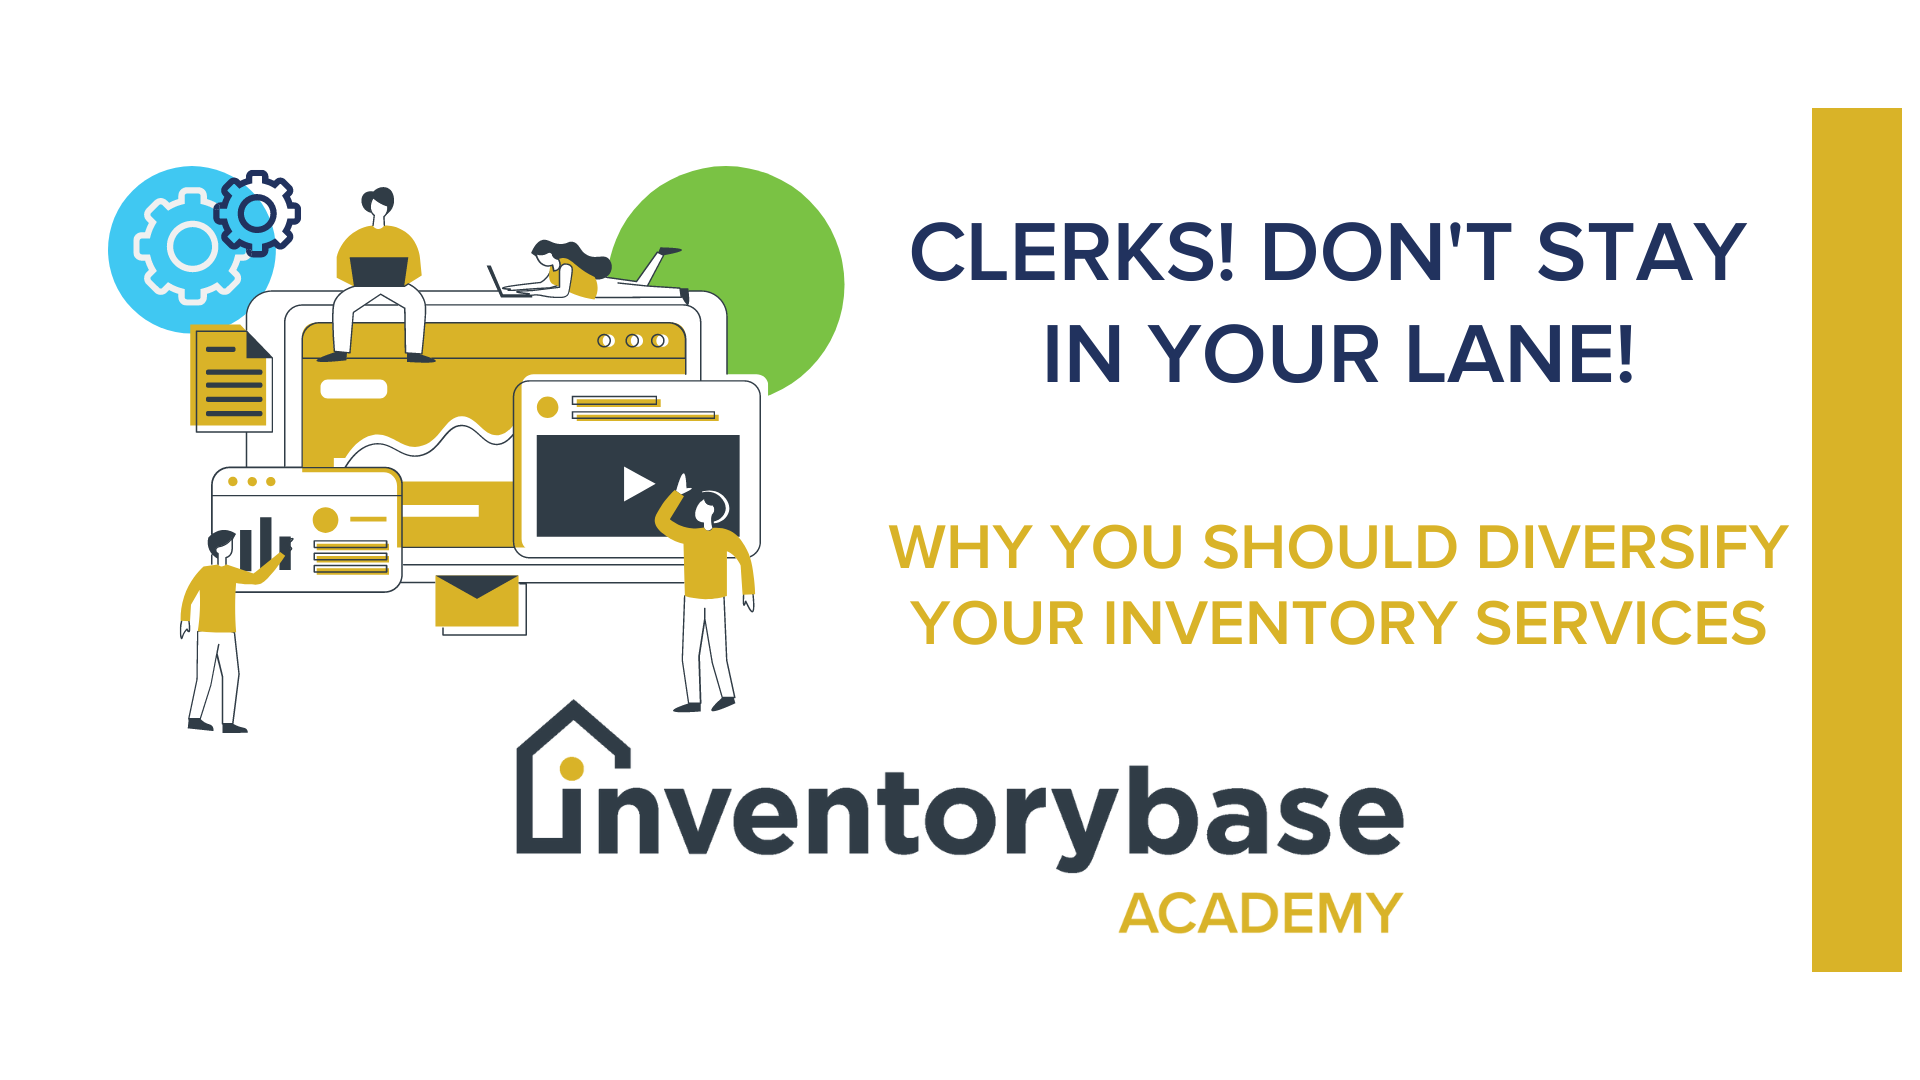 Clerks! Don’t stay in your lane – Diversify your services 